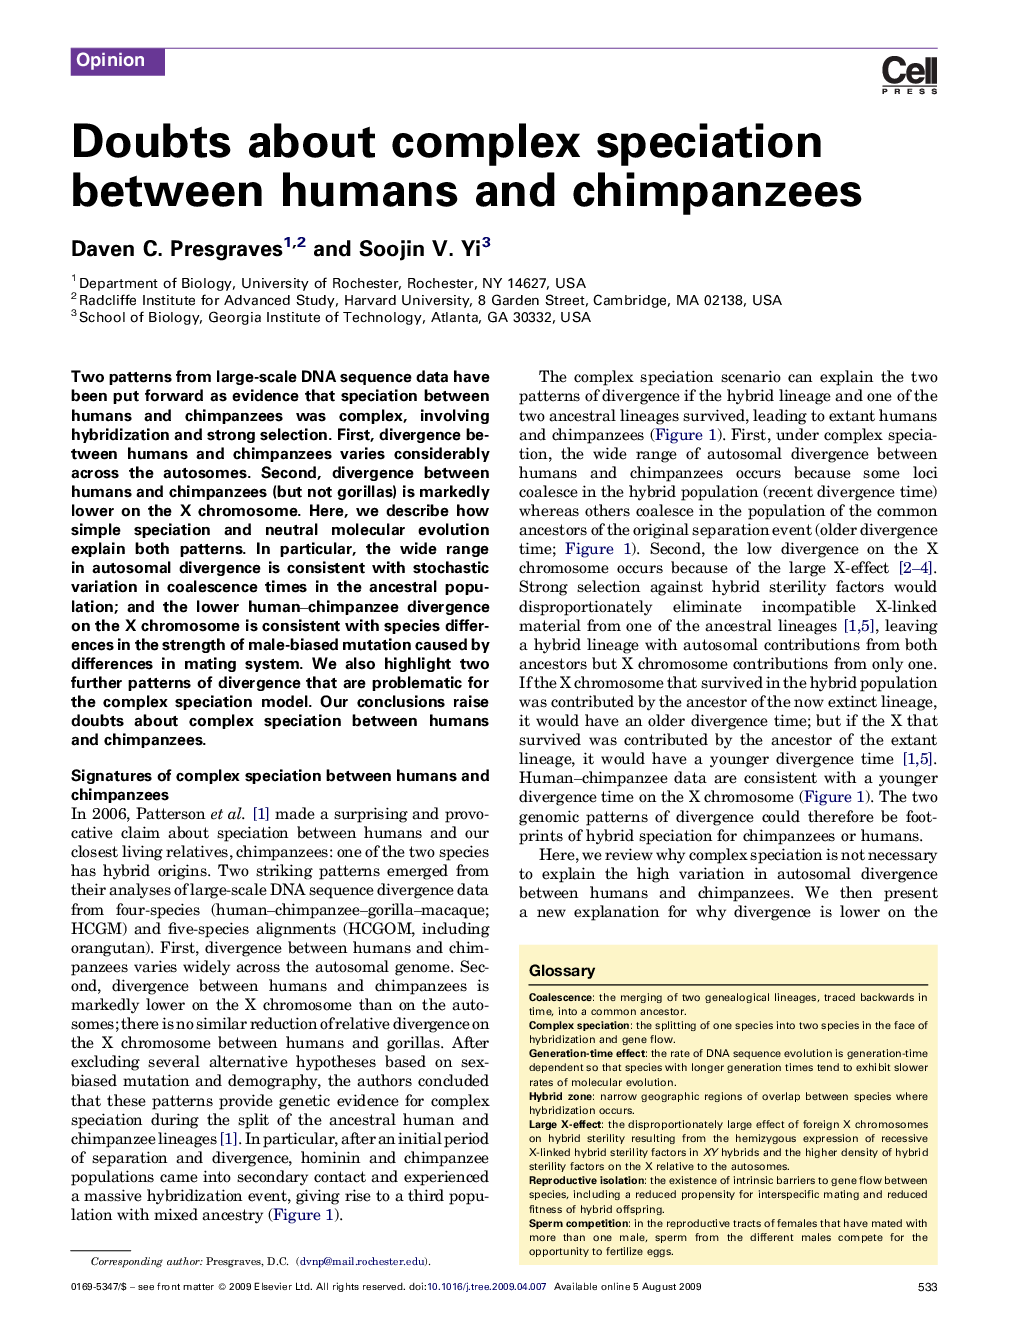 Doubts about complex speciation between humans and chimpanzees